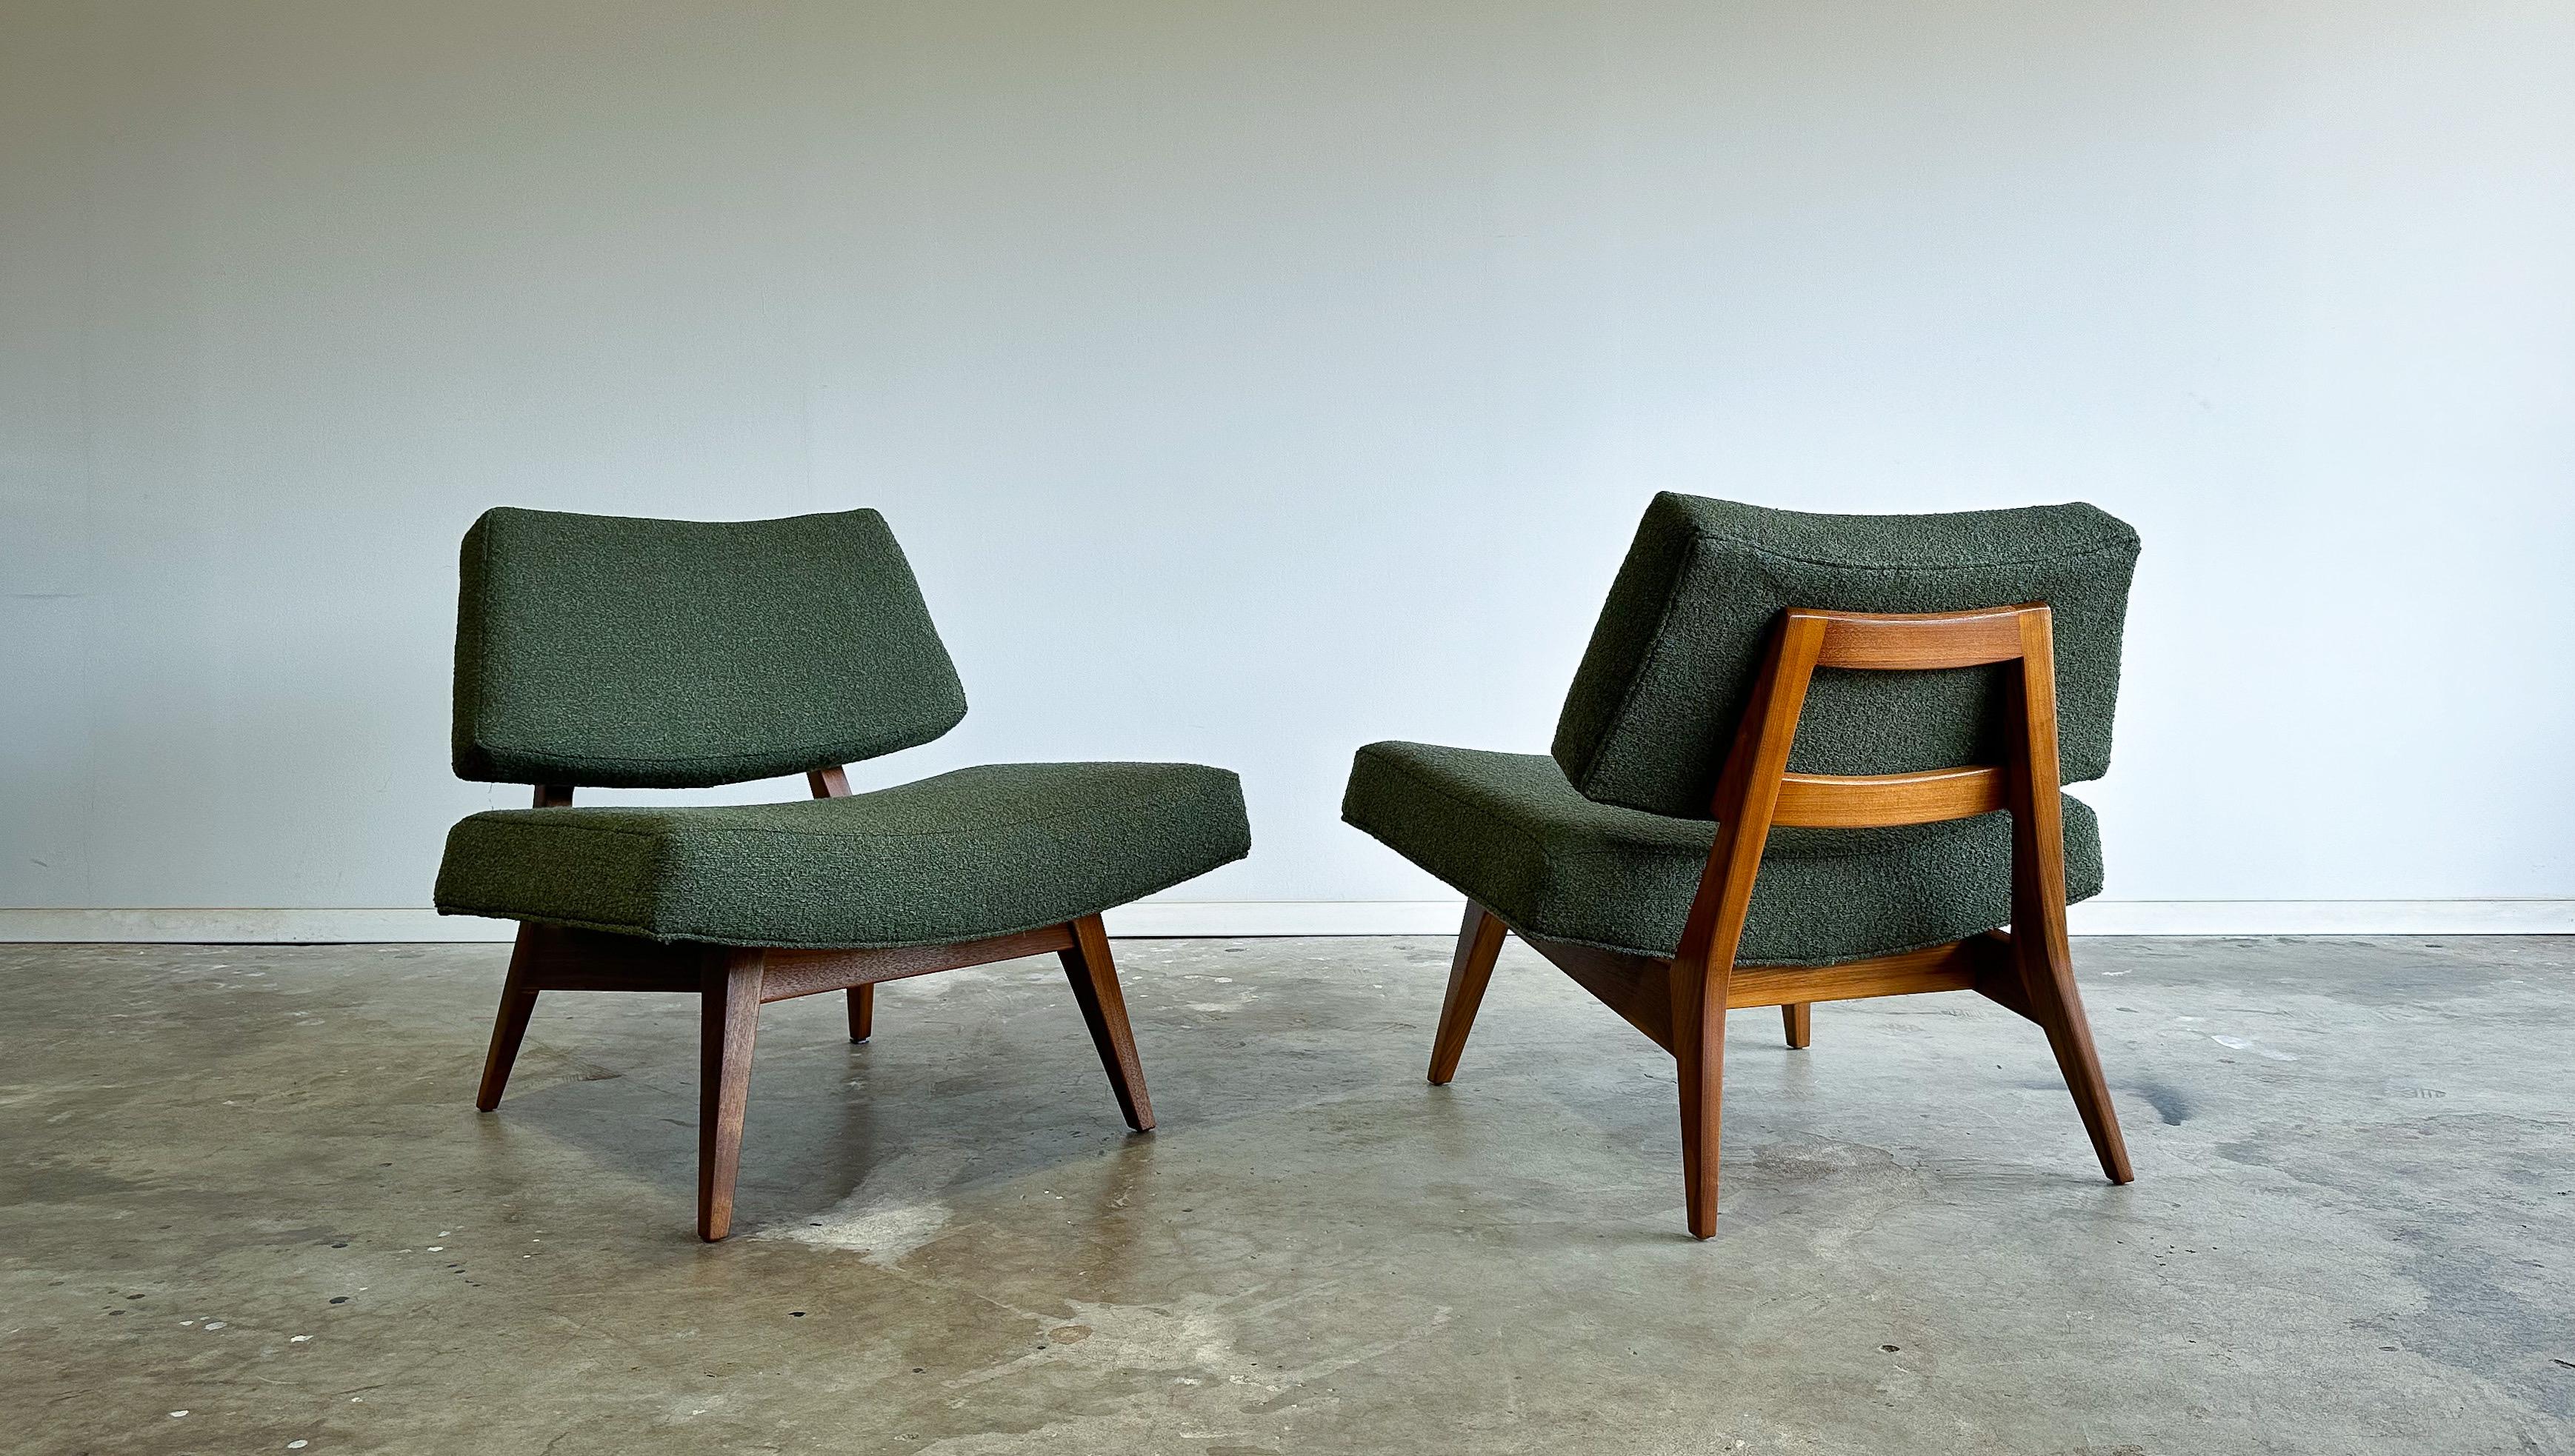 Offered is a rare pair of low lounge chairs designed by Jens Risom for Risom Designs, Inc. circa 1952.

Low, deep, and wide these chairs have an amazing presence and level of comfort. Featuring fully restored sculpted solid walnut frames paired with